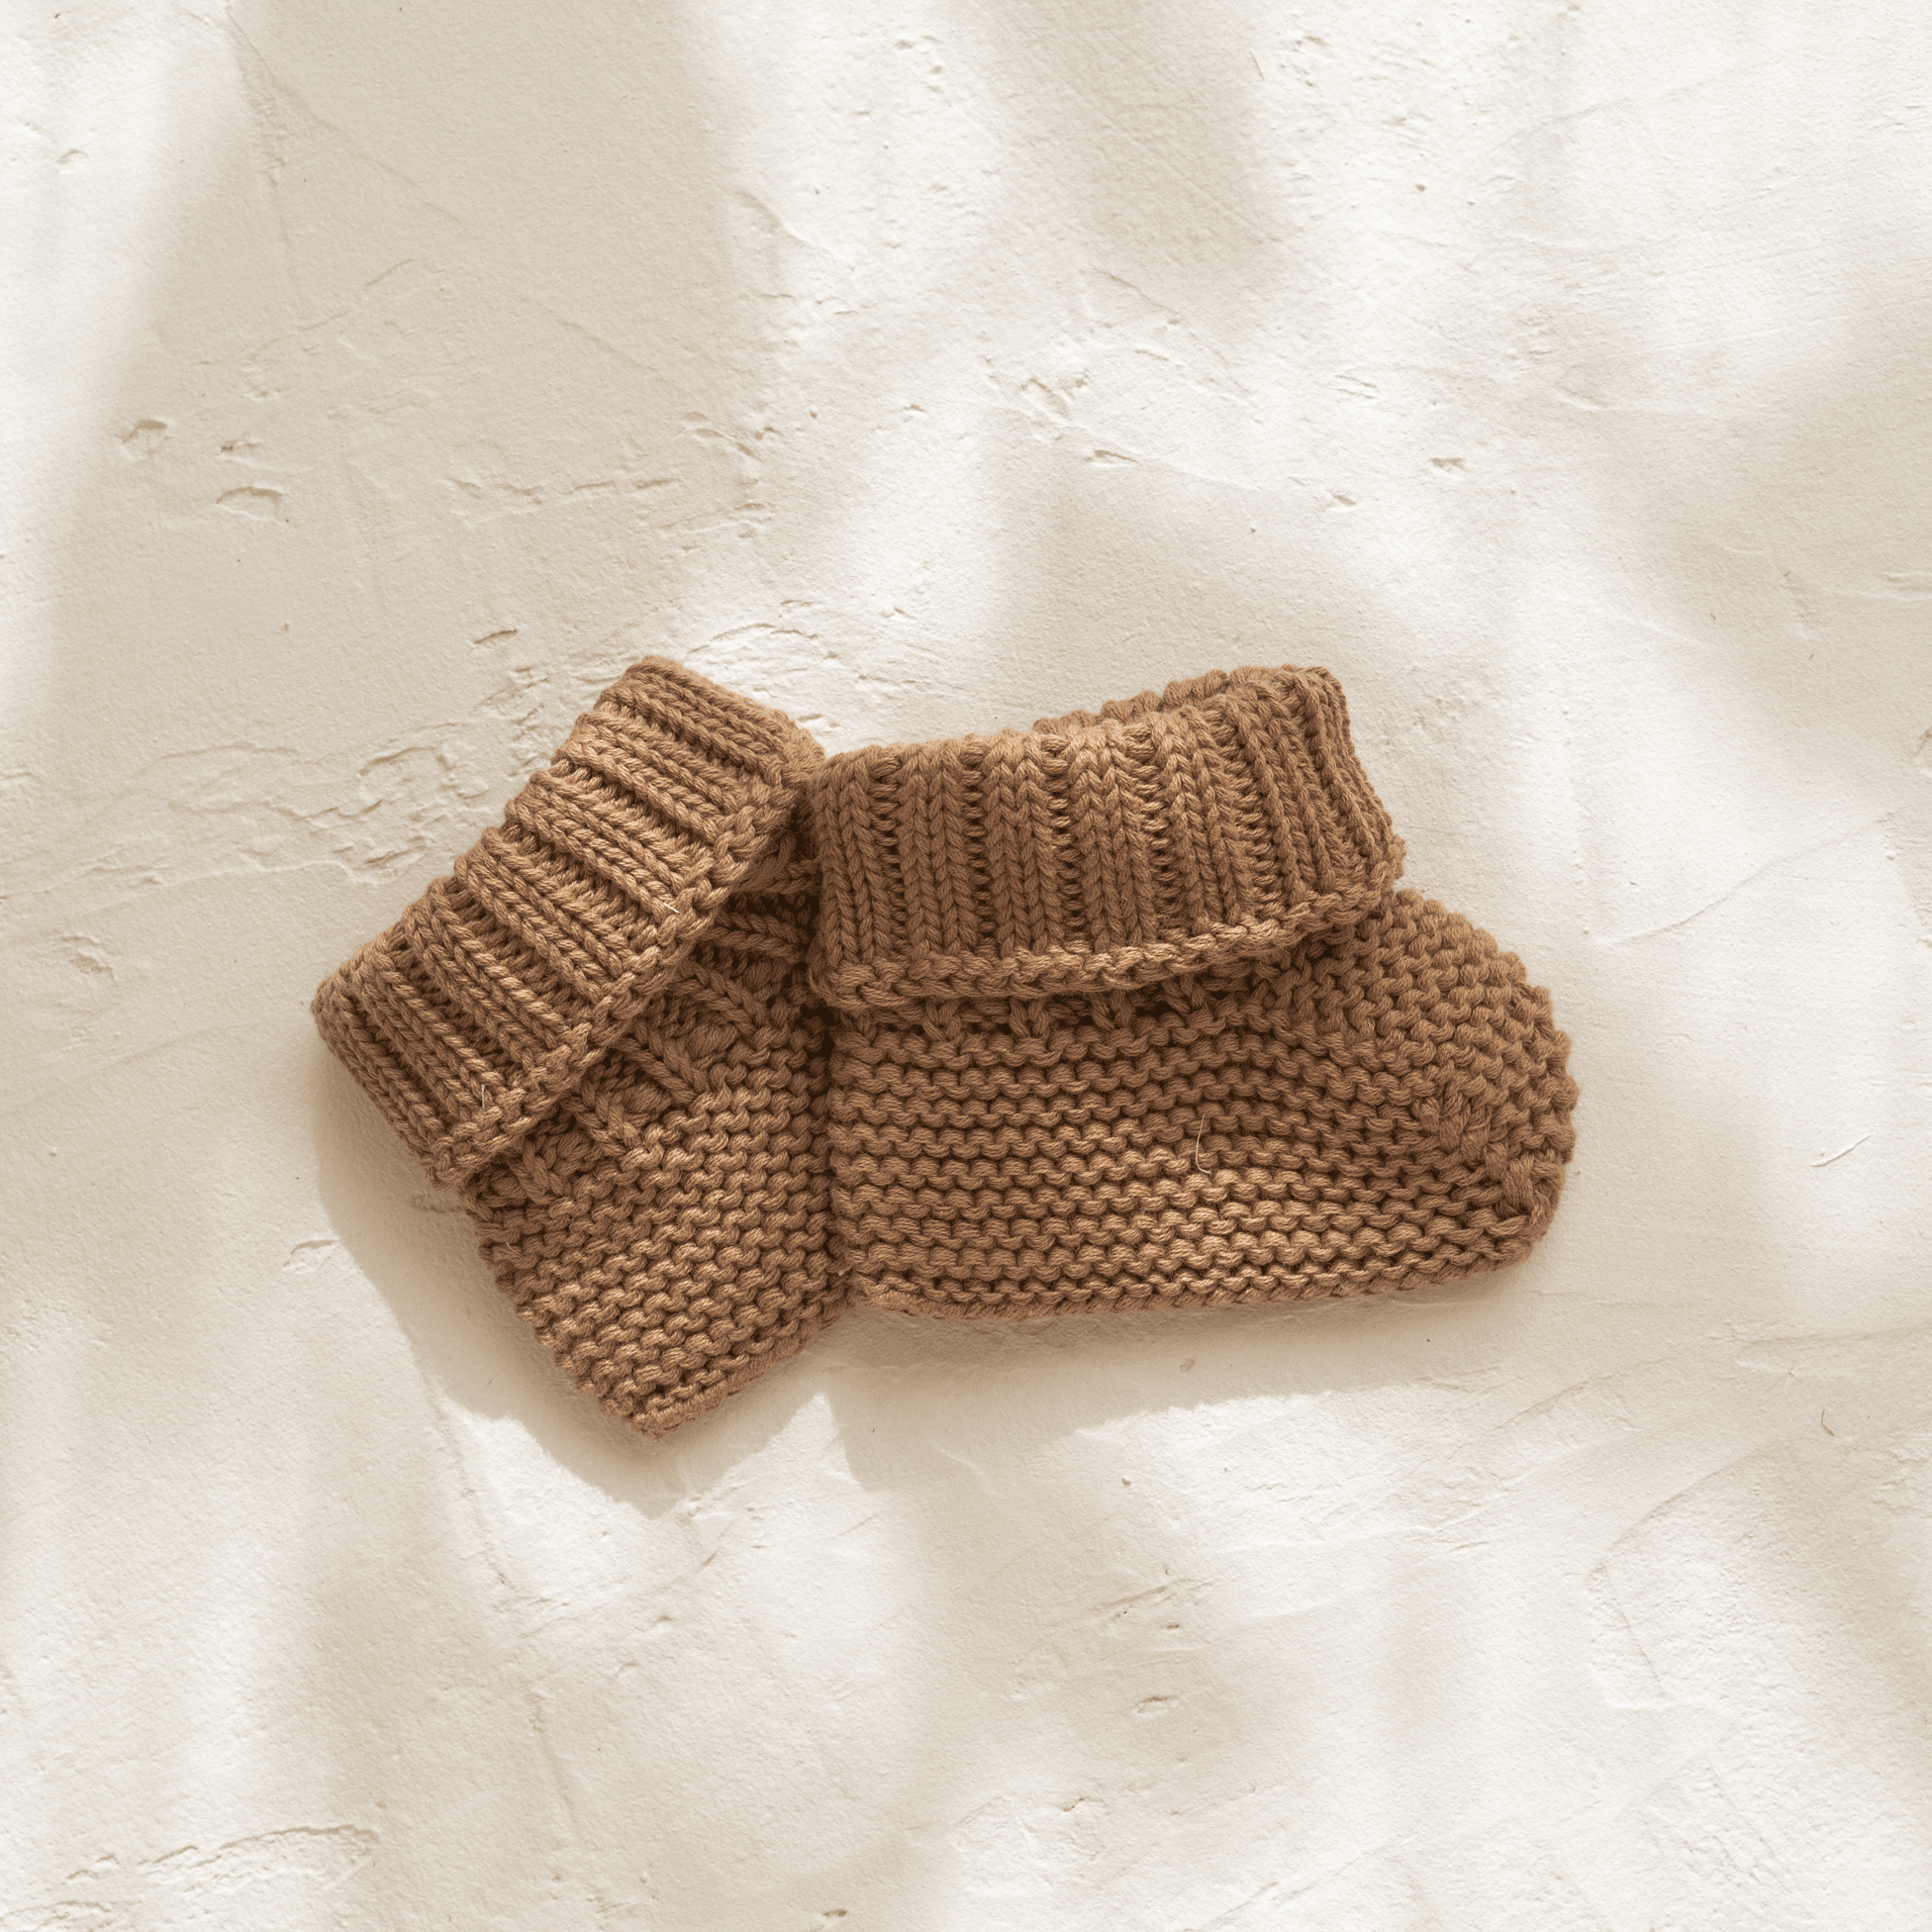 A pair of Illoura the Label organic cotton knitted illoura baby booties in chocolate on a white surface.